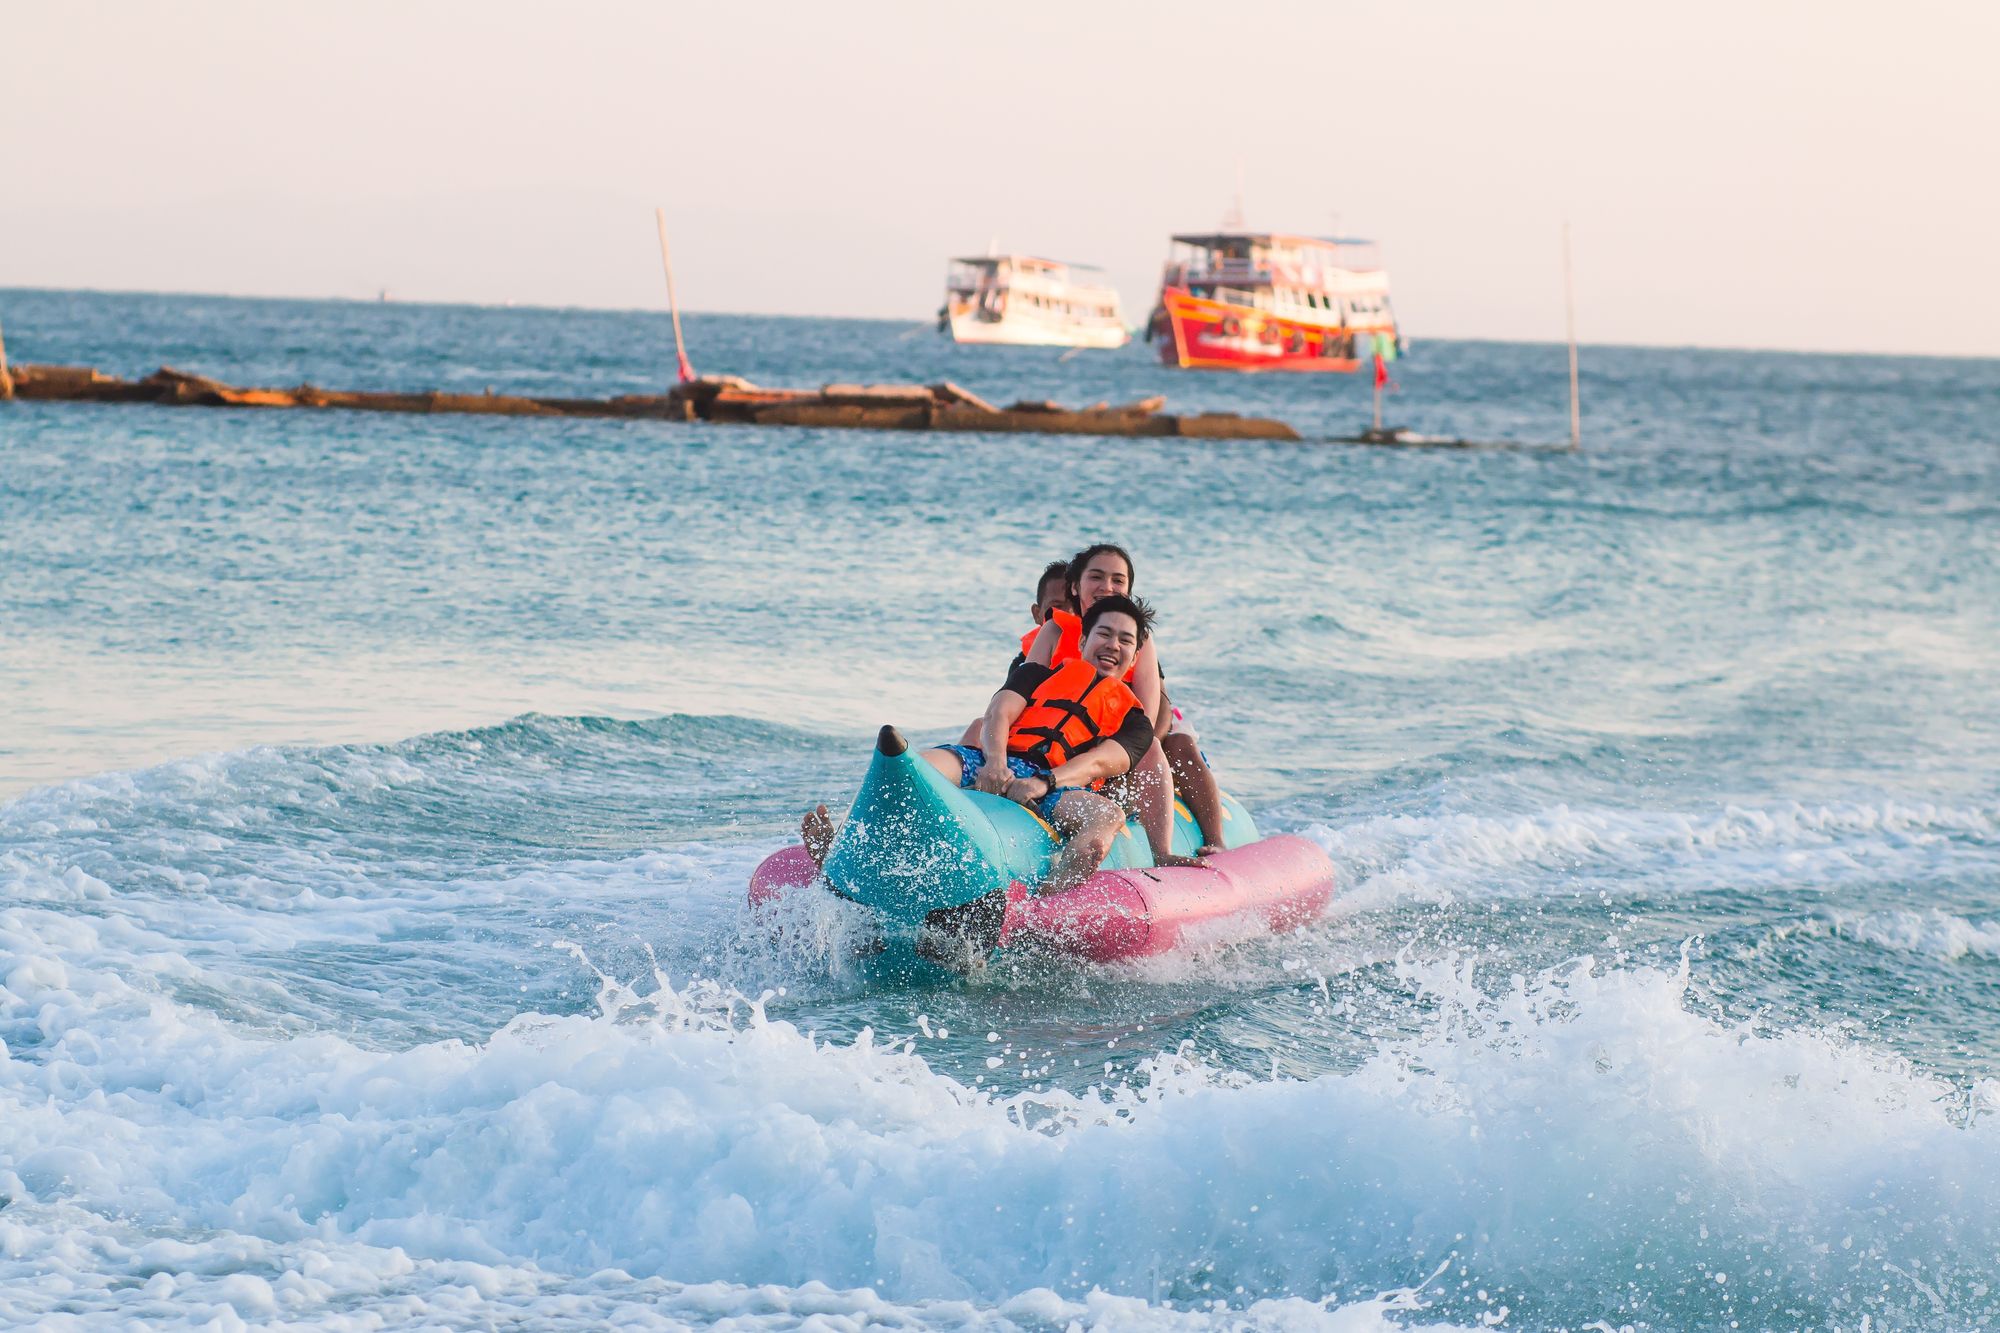 Hop Into The Bumpy Waves With Banana Boat Ride in Goa